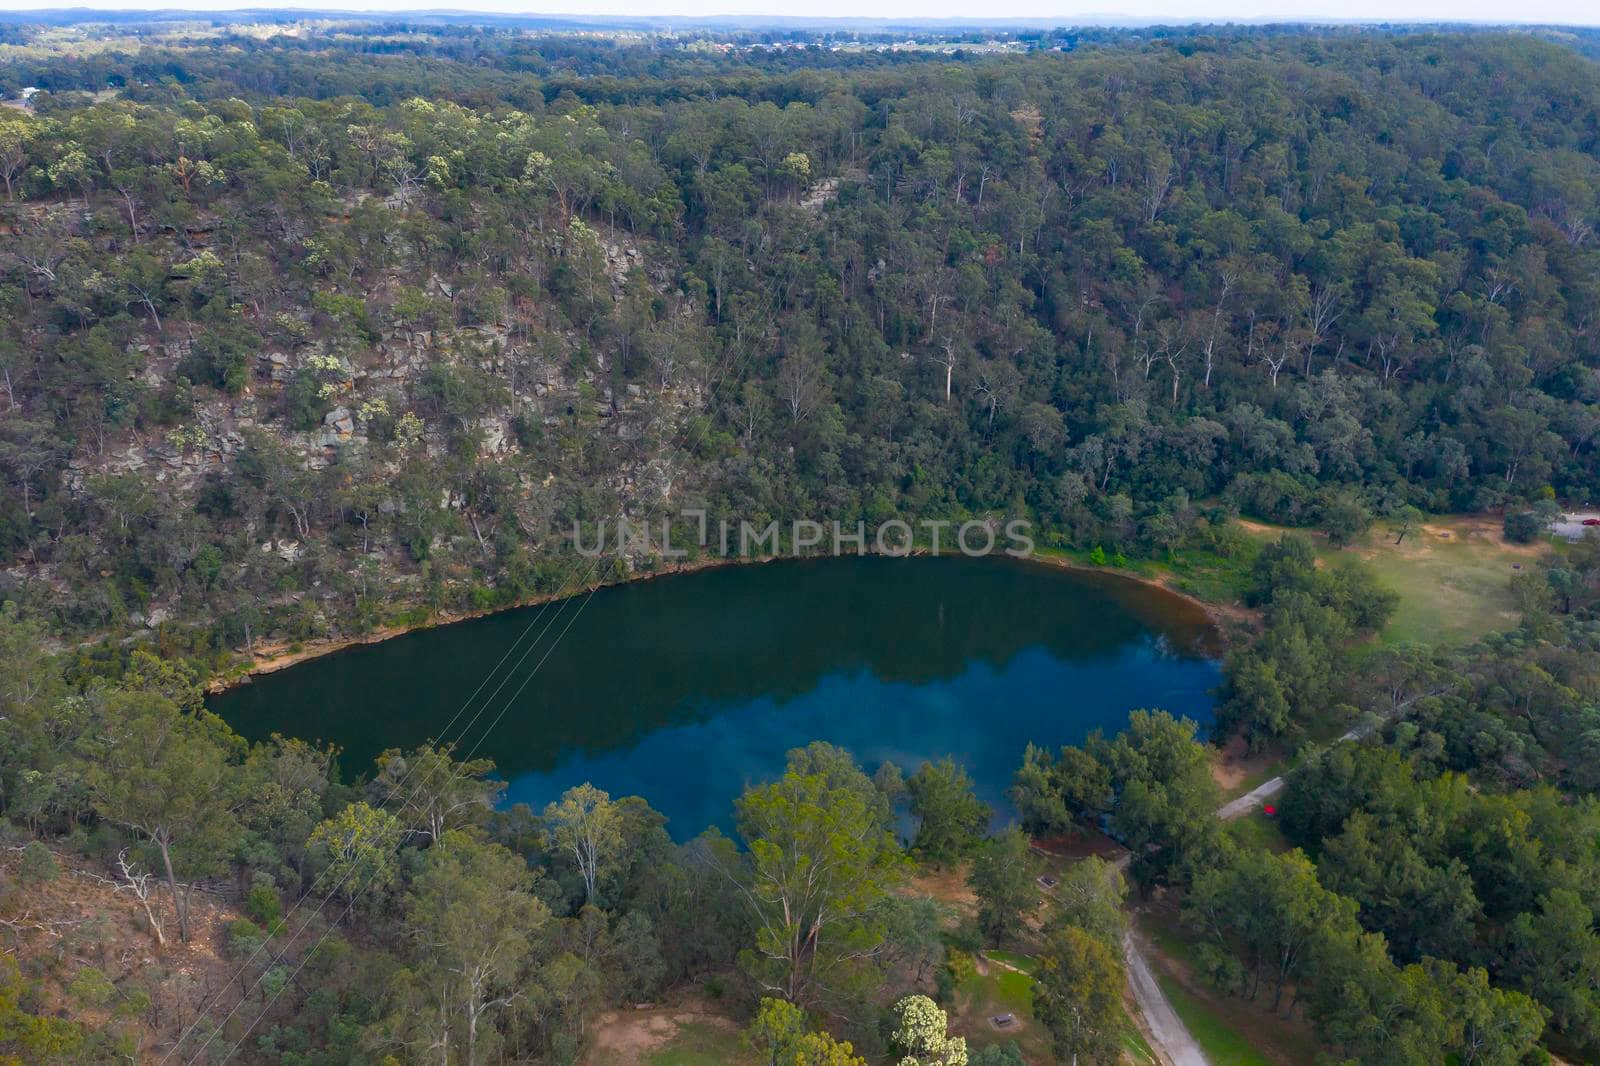 A lake in a state park conservation area which is used for tourism and recreation. by WittkePhotos